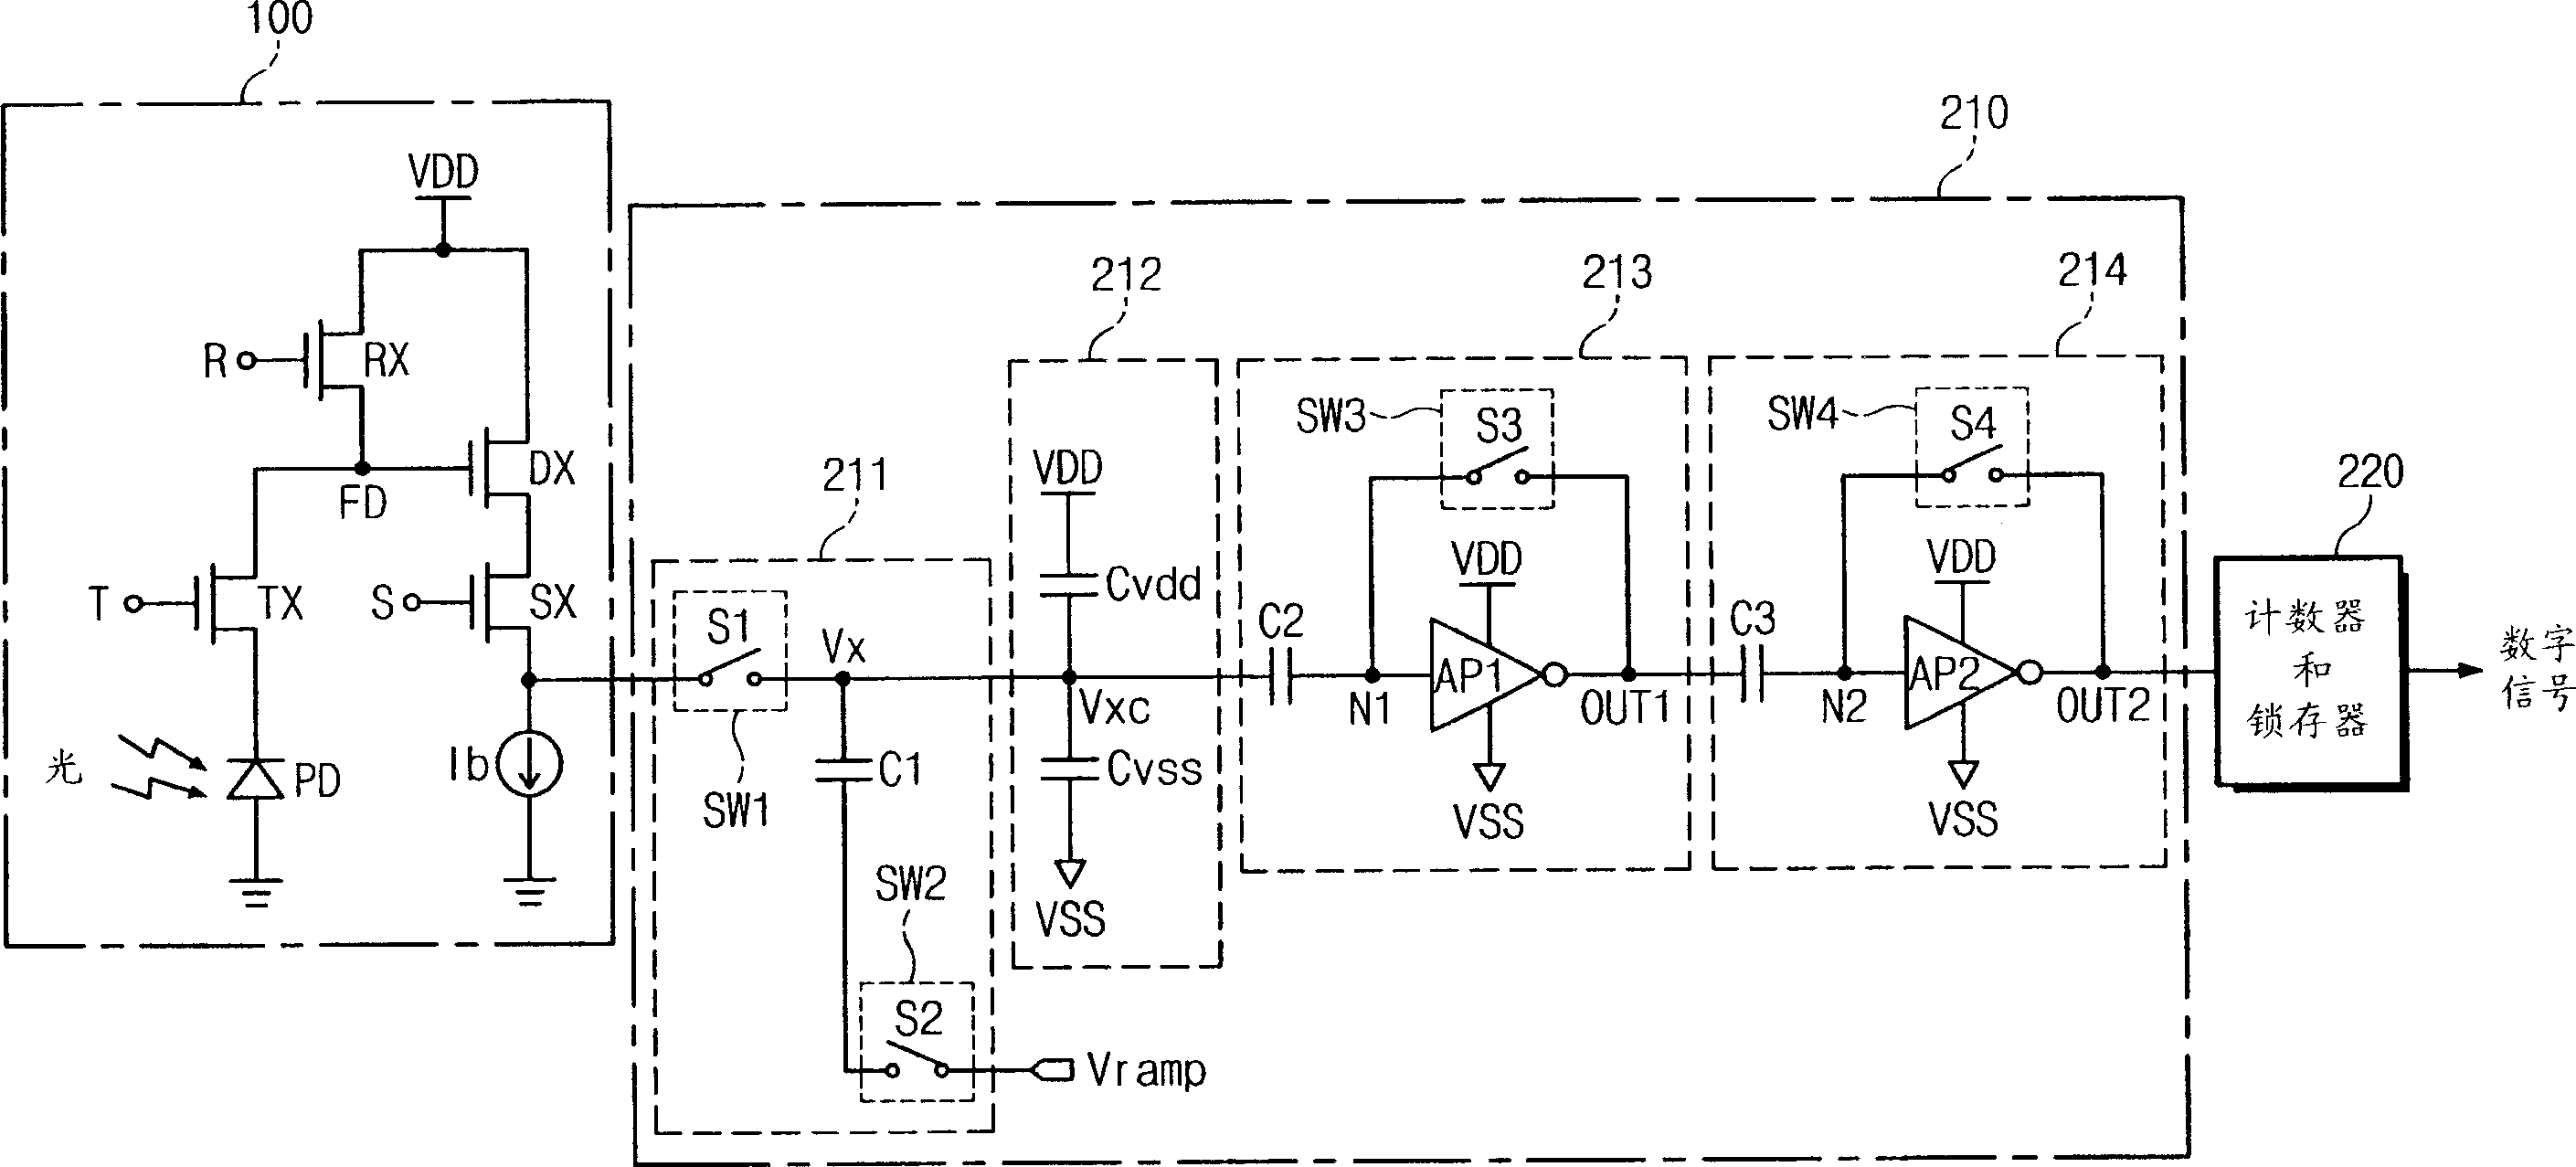 Analog-to-digital converter with noise compensation in cmos image sensor